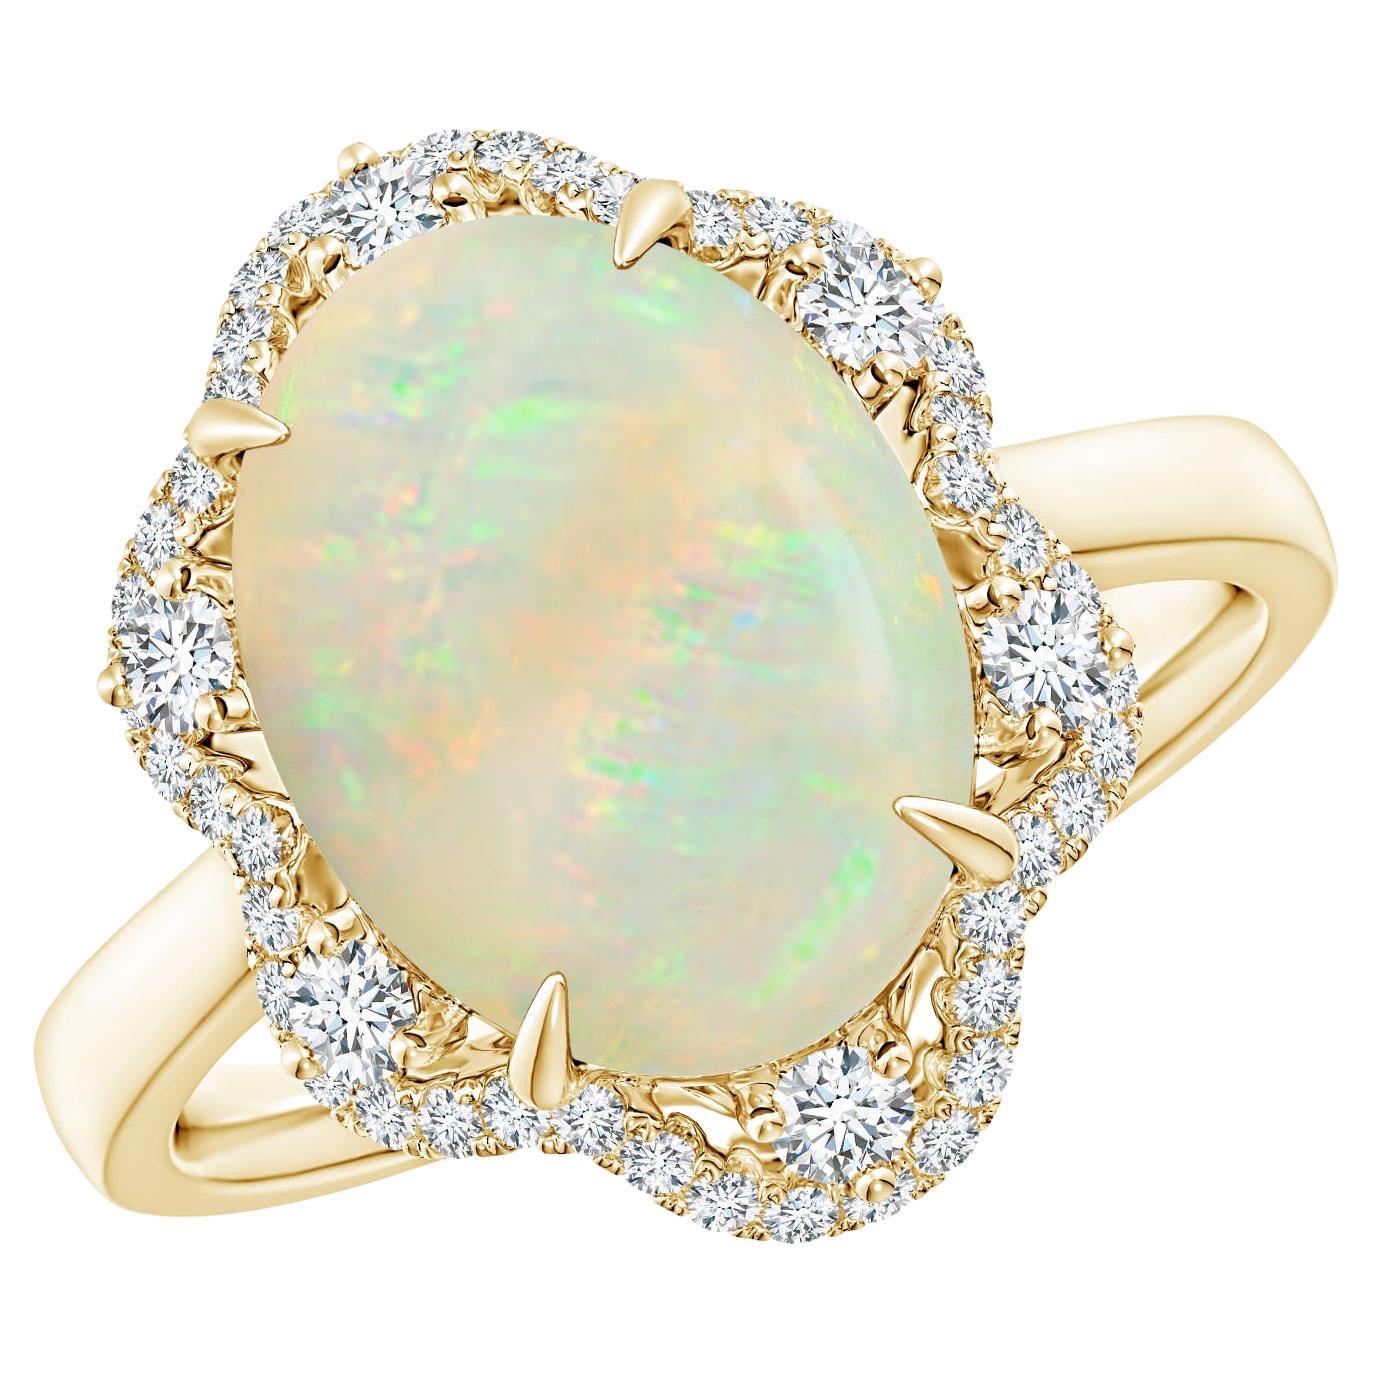 For Sale:  Angara Gia Certified Natural Opal Ring in Yellow Gold with Reverse Tapered Shank